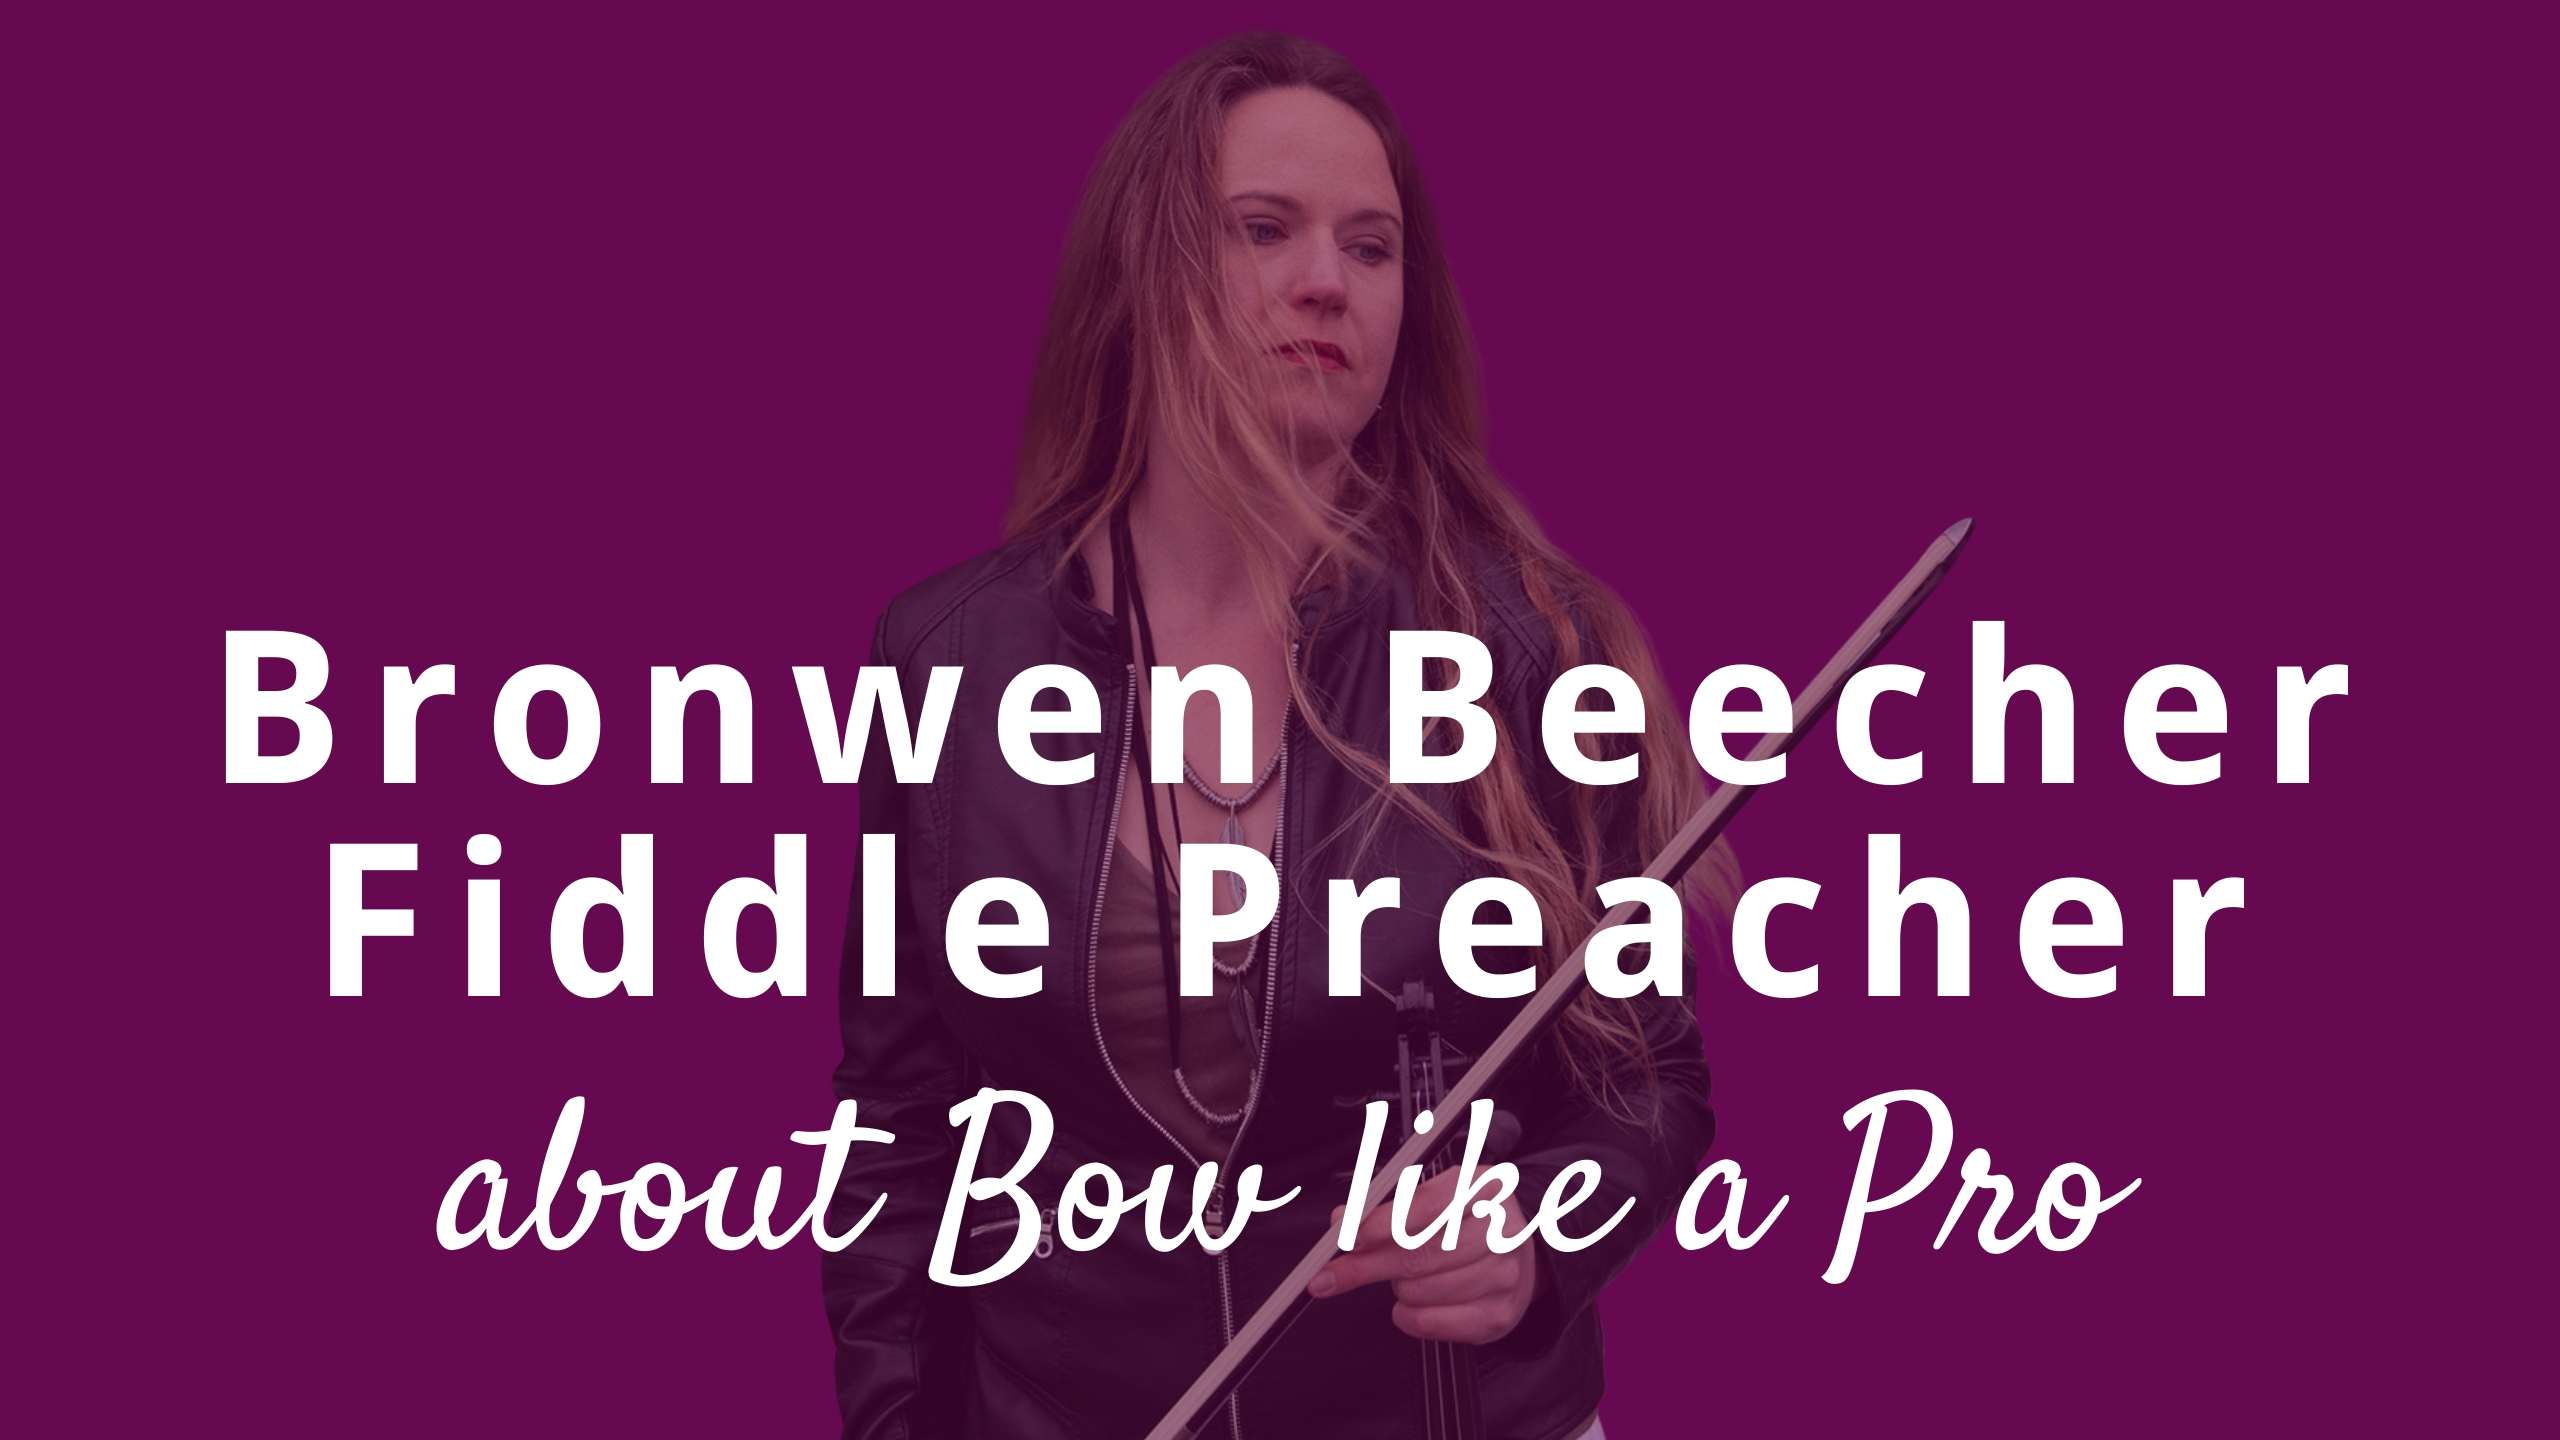 Violin Lessons with Bronwen Beecher the Fiddle Preacher